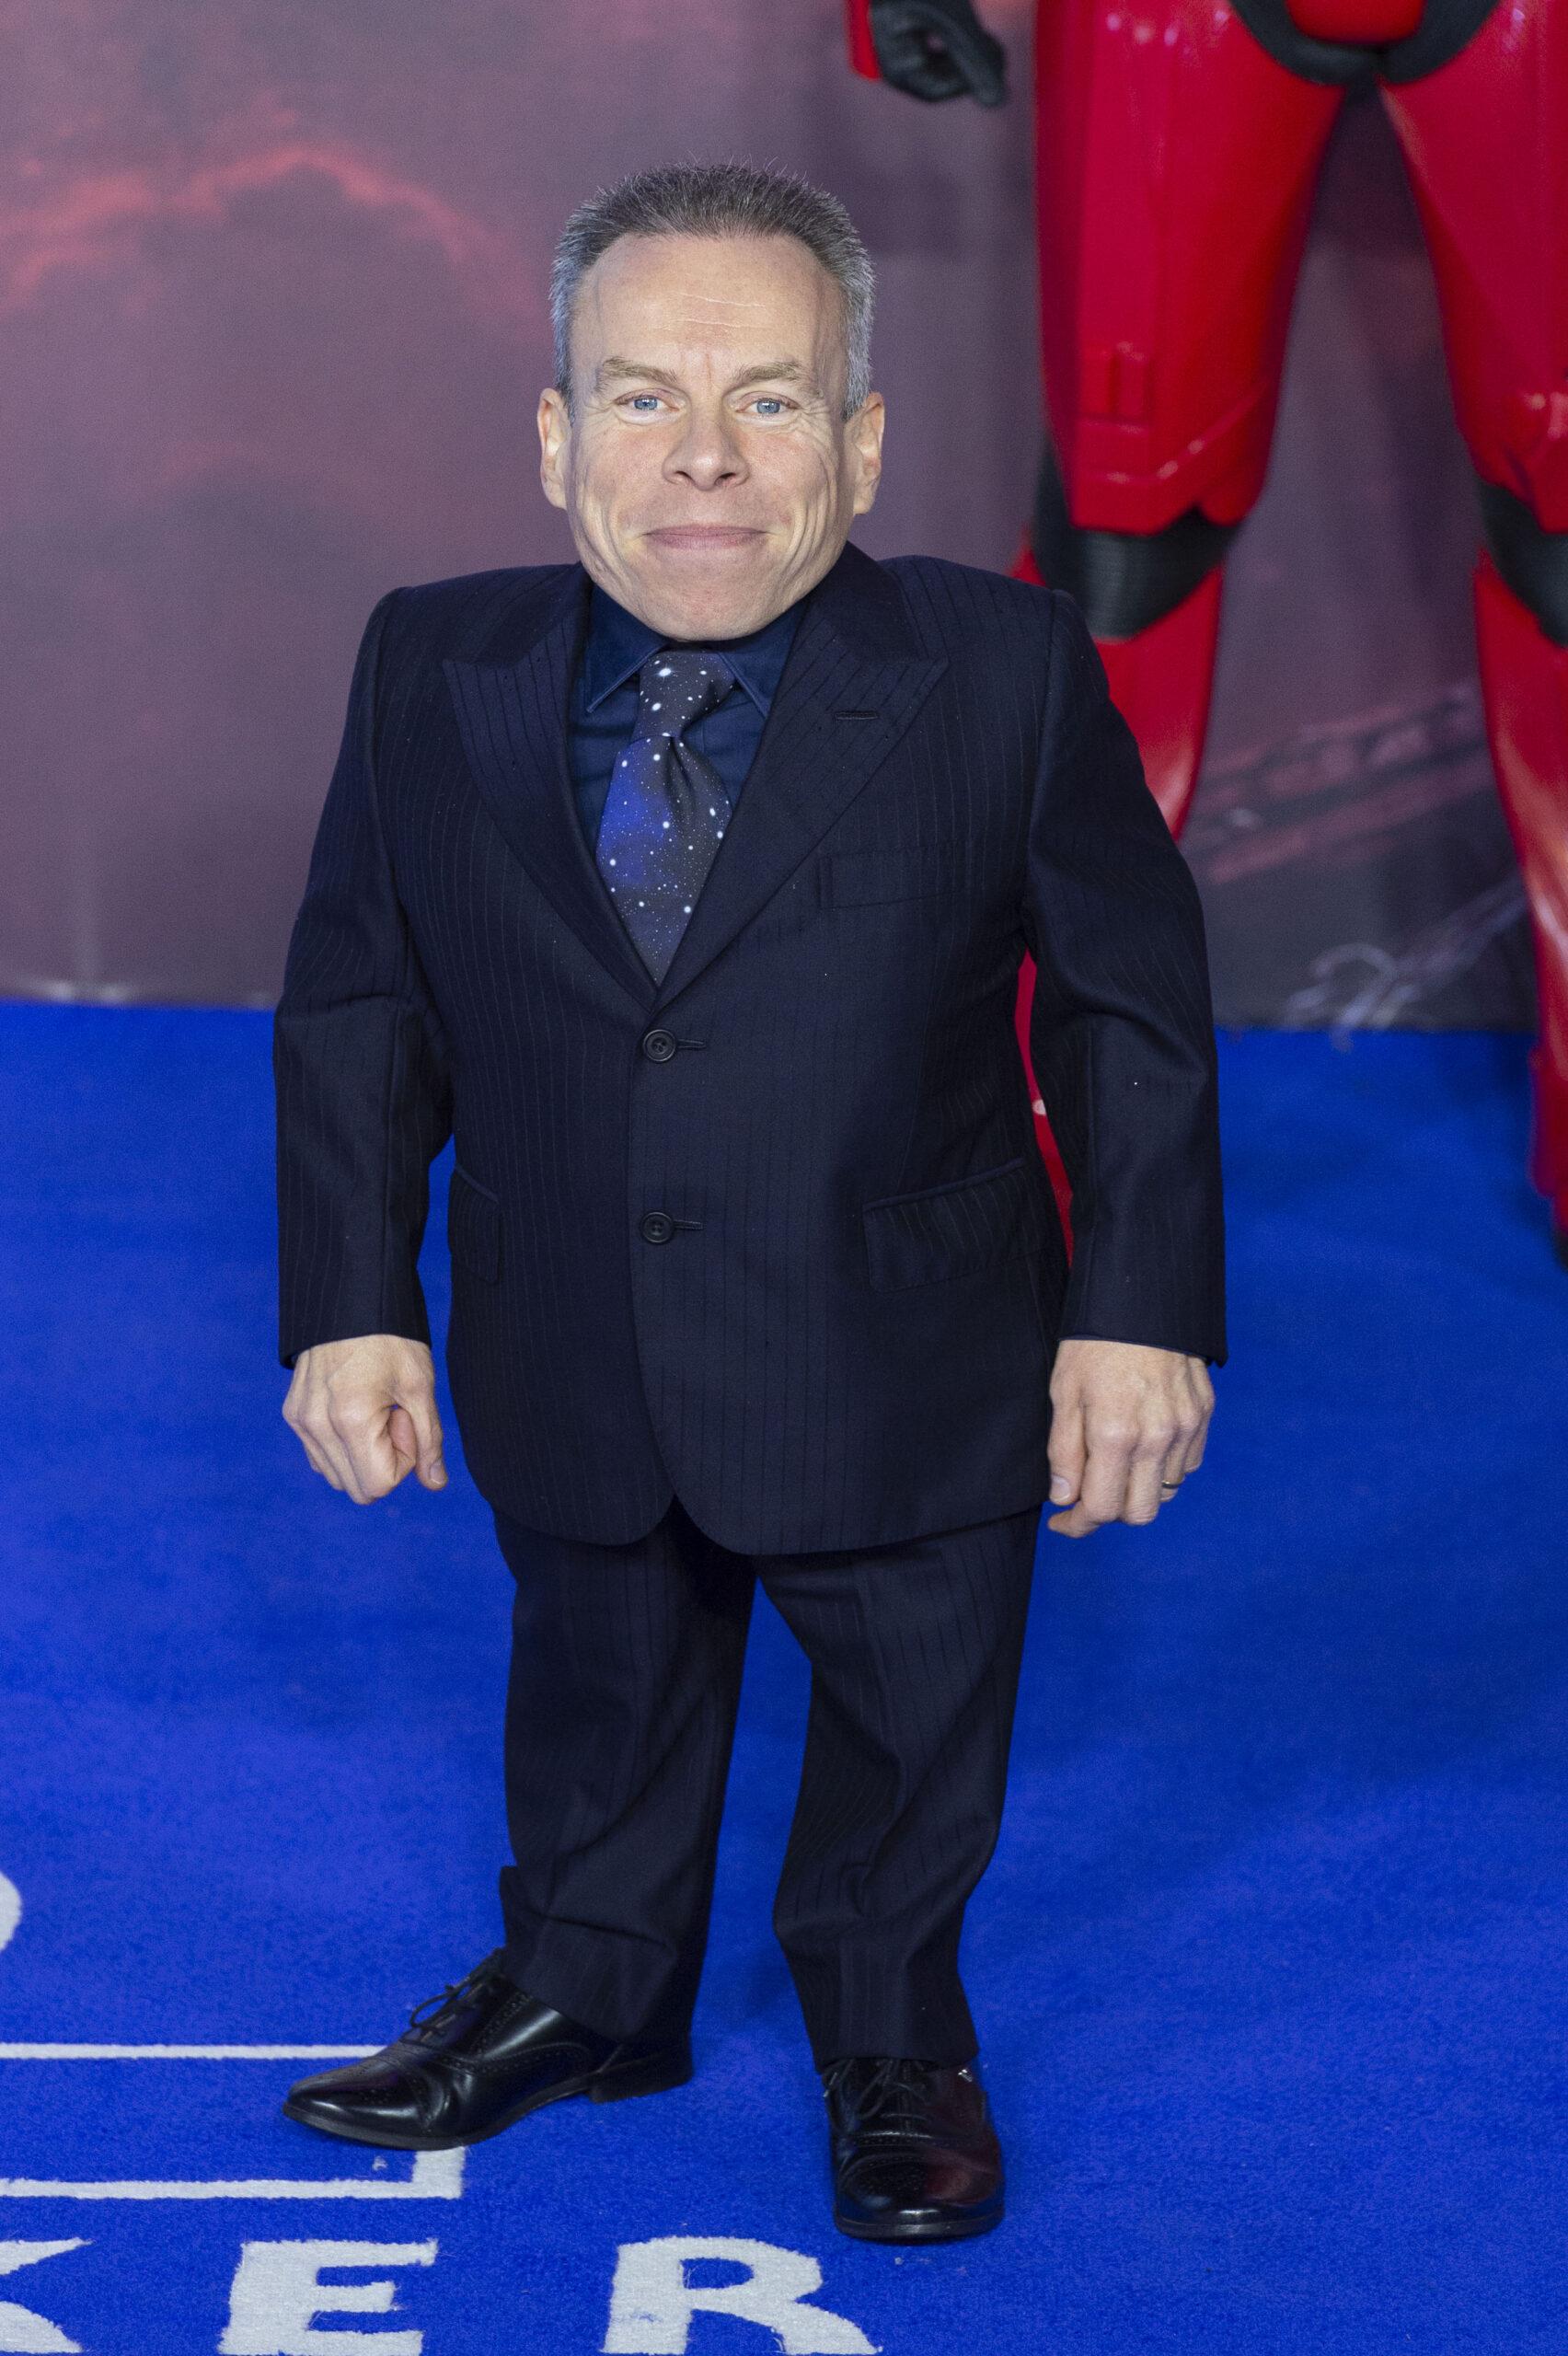 Warwick Davis attends the European Film Premiere of Star Wars: The Rise of Skywalker at the Cineworld Cinema in Leicester Square.